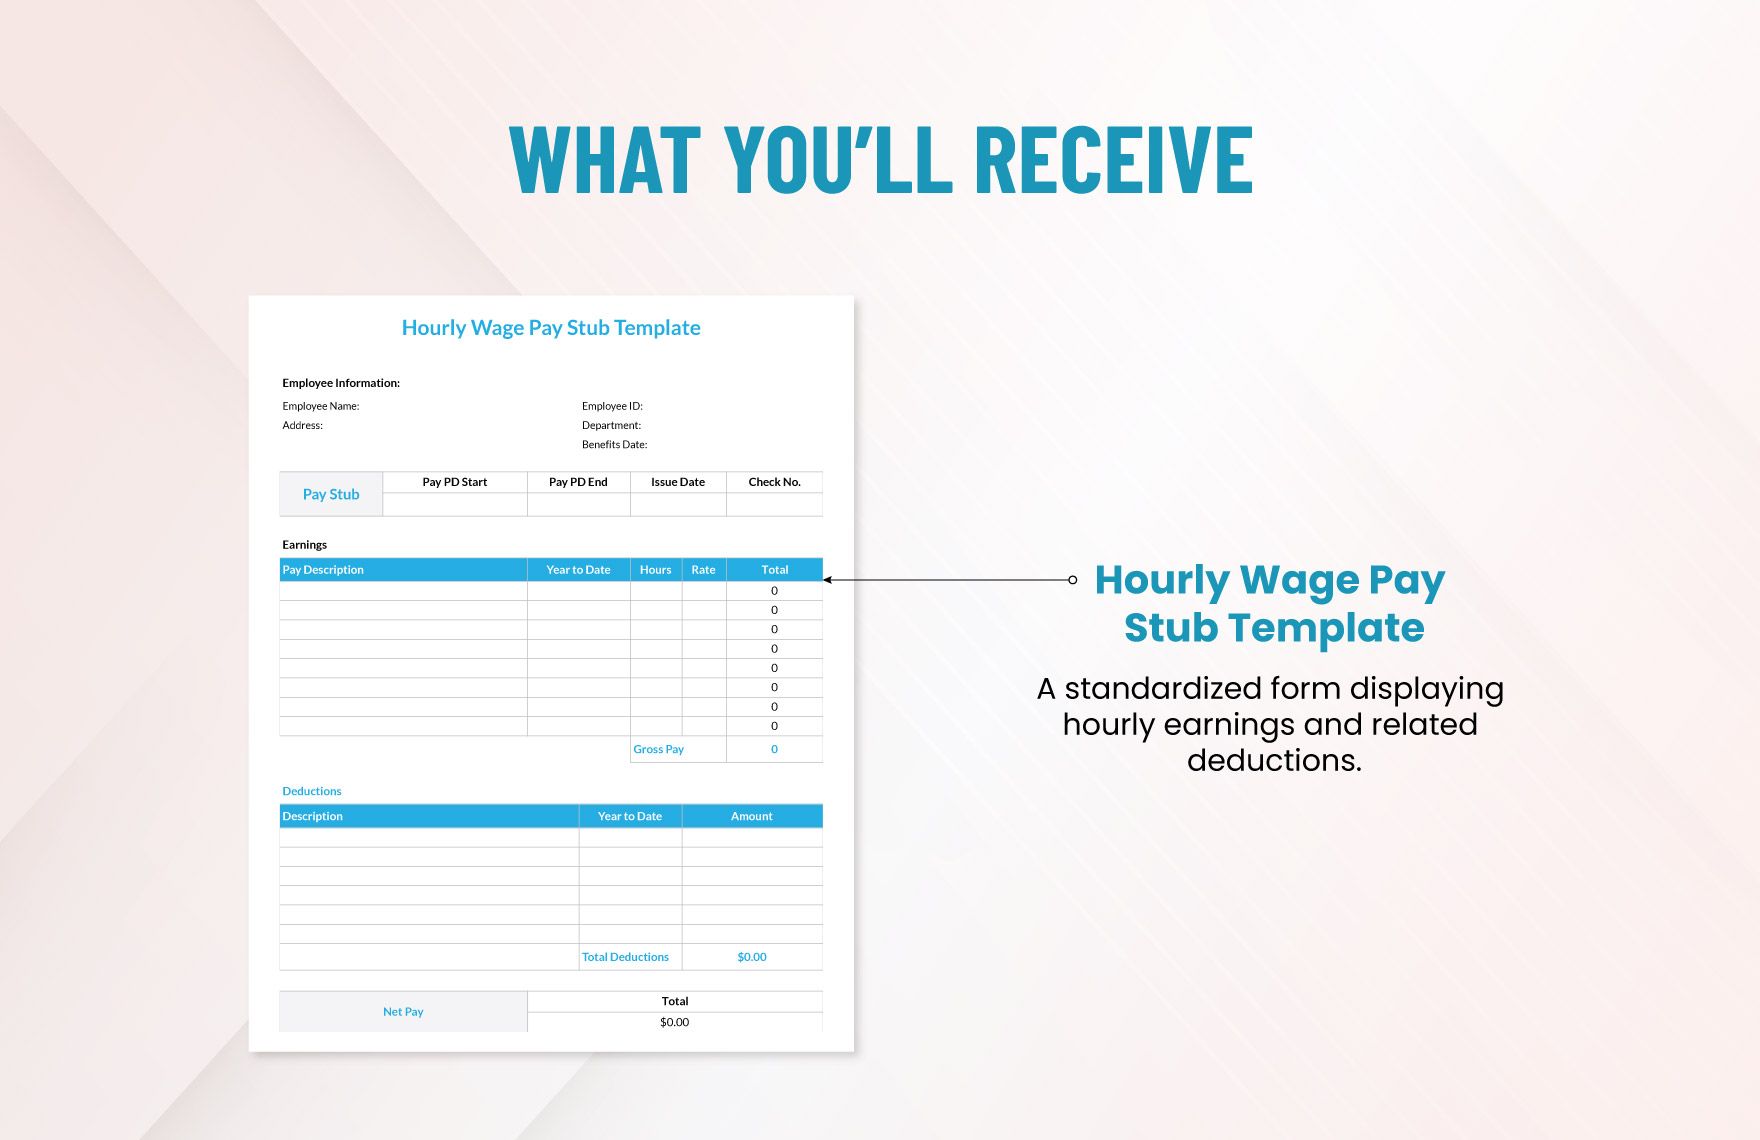 Hourly Wage Pay Stub Template